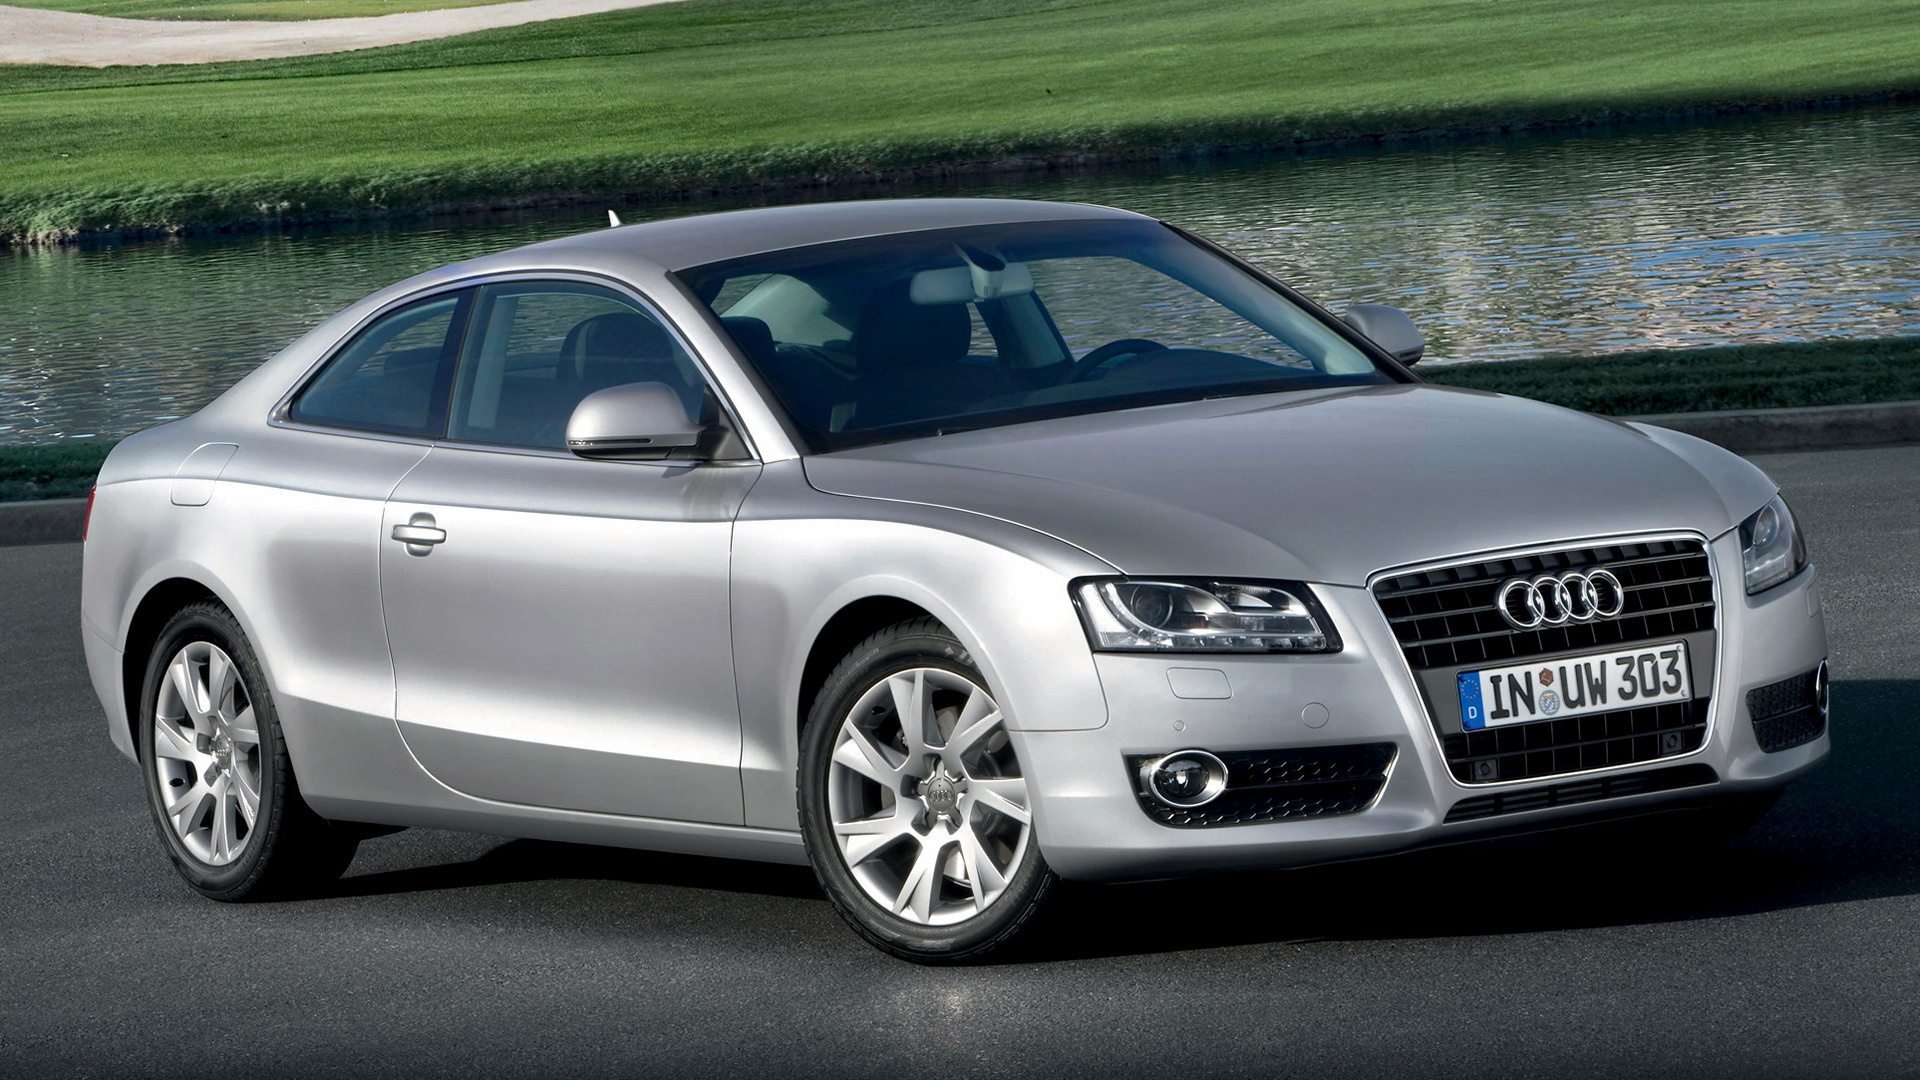 2007 Audi A5 Coupe - Wallpapers and HD Images | Car Pixel